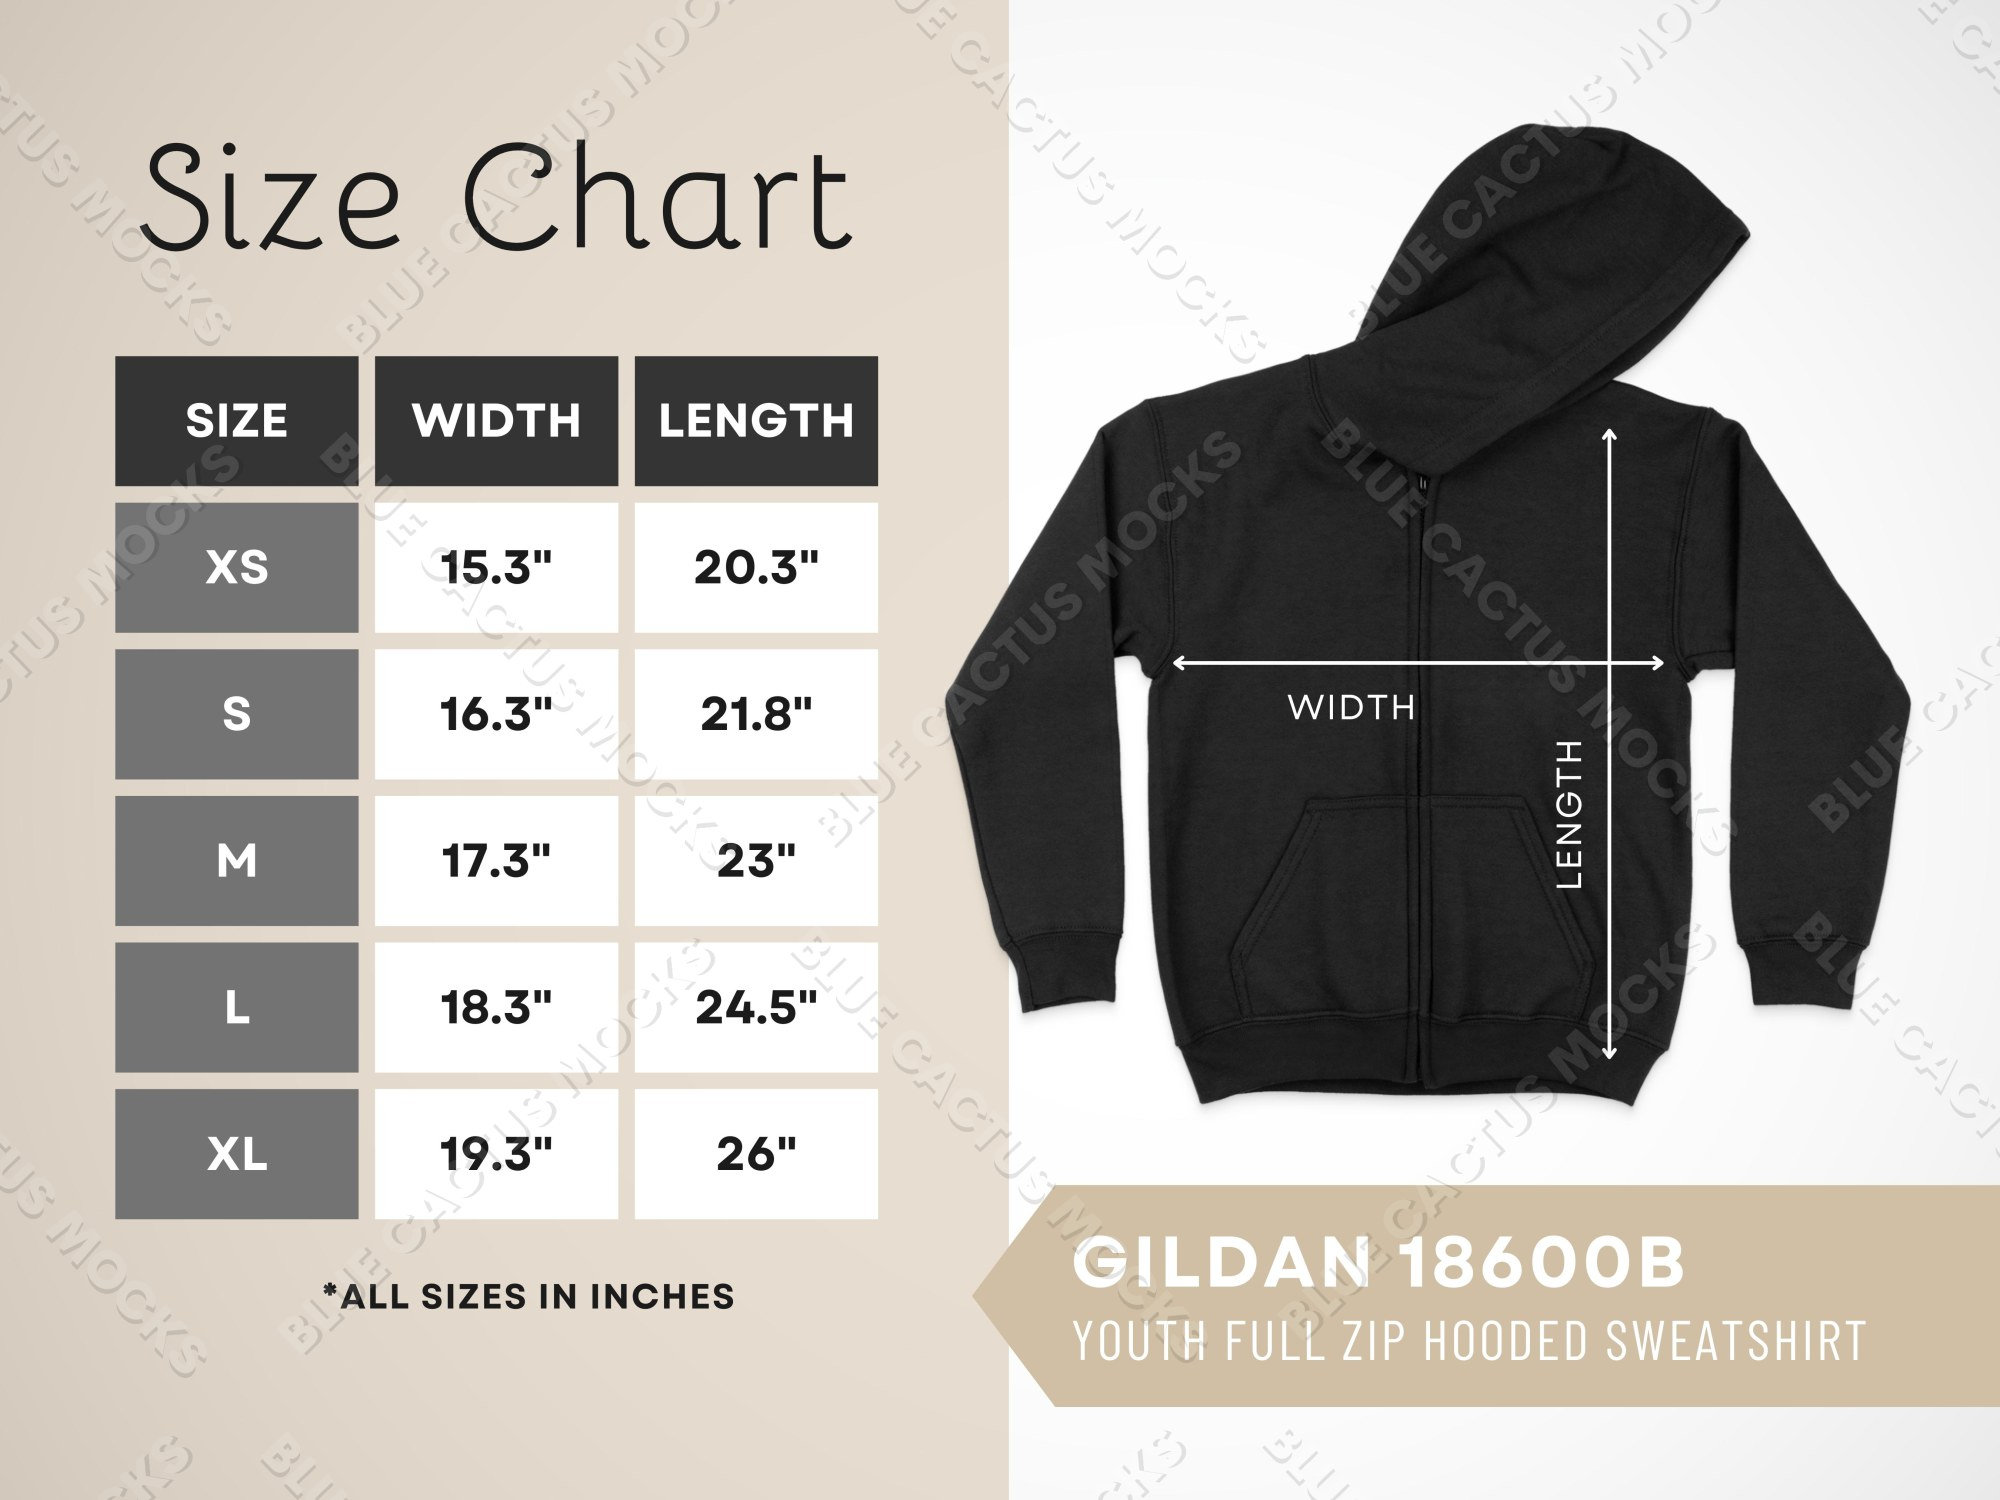 Gildan 18600B Size Chart Sizing Guide for Youth Full Zip - Etsy